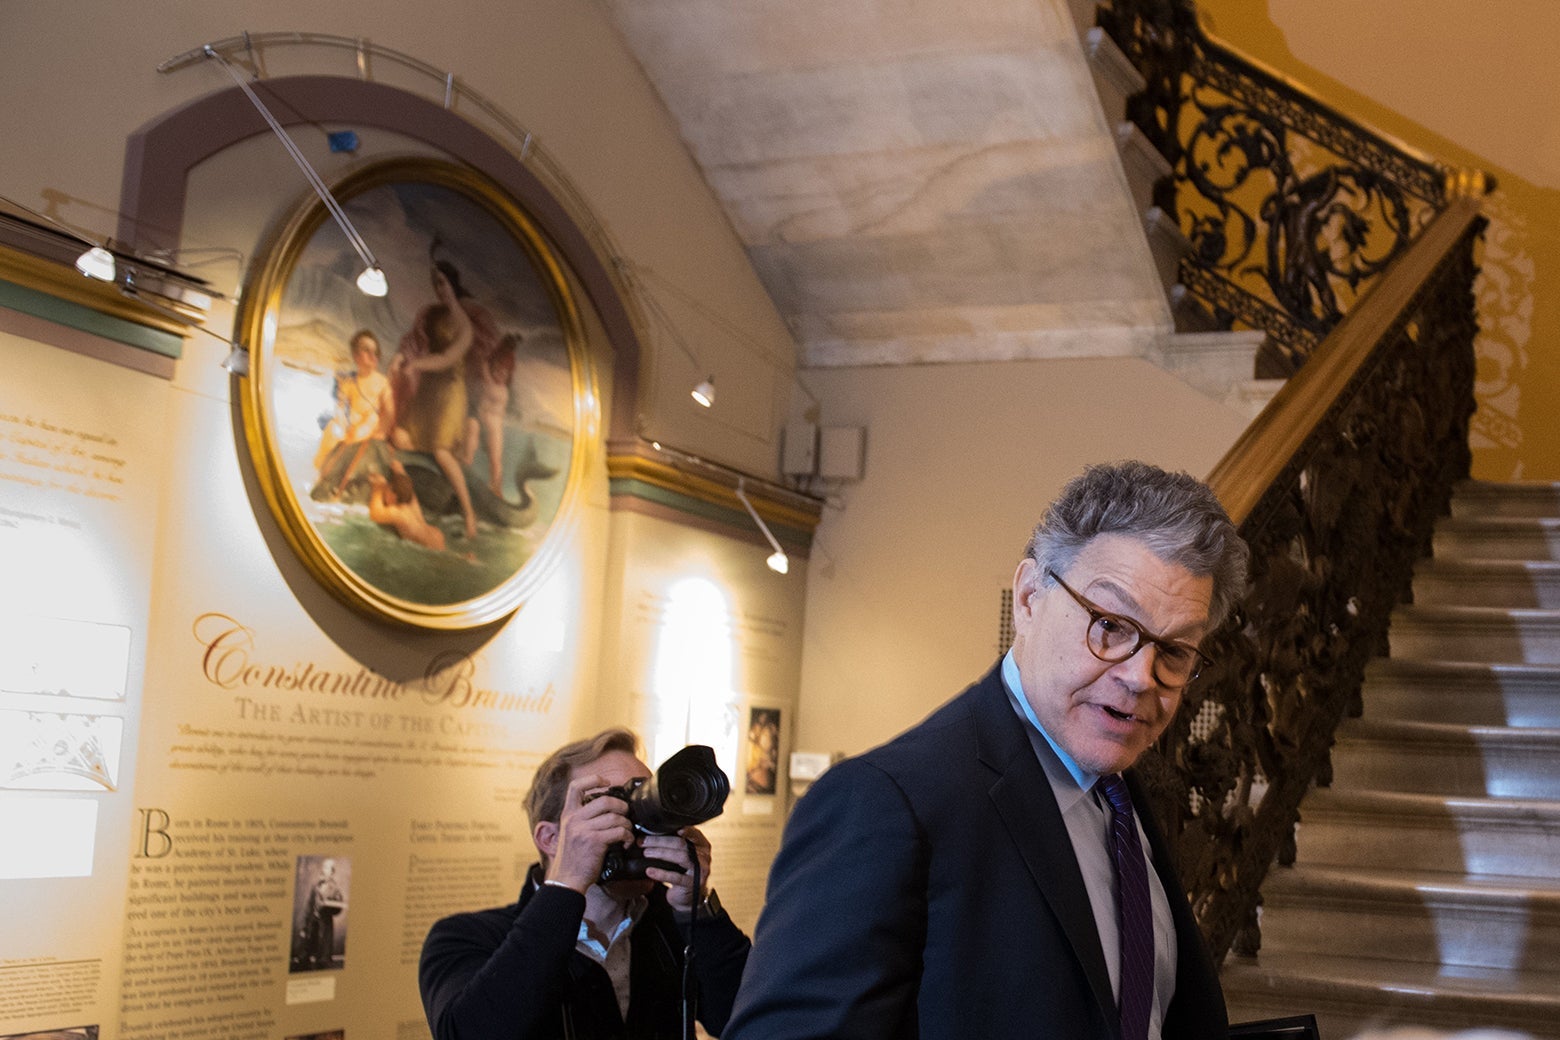 Franken standing next to a staircase in the Capitol as a photographer takes his picture.